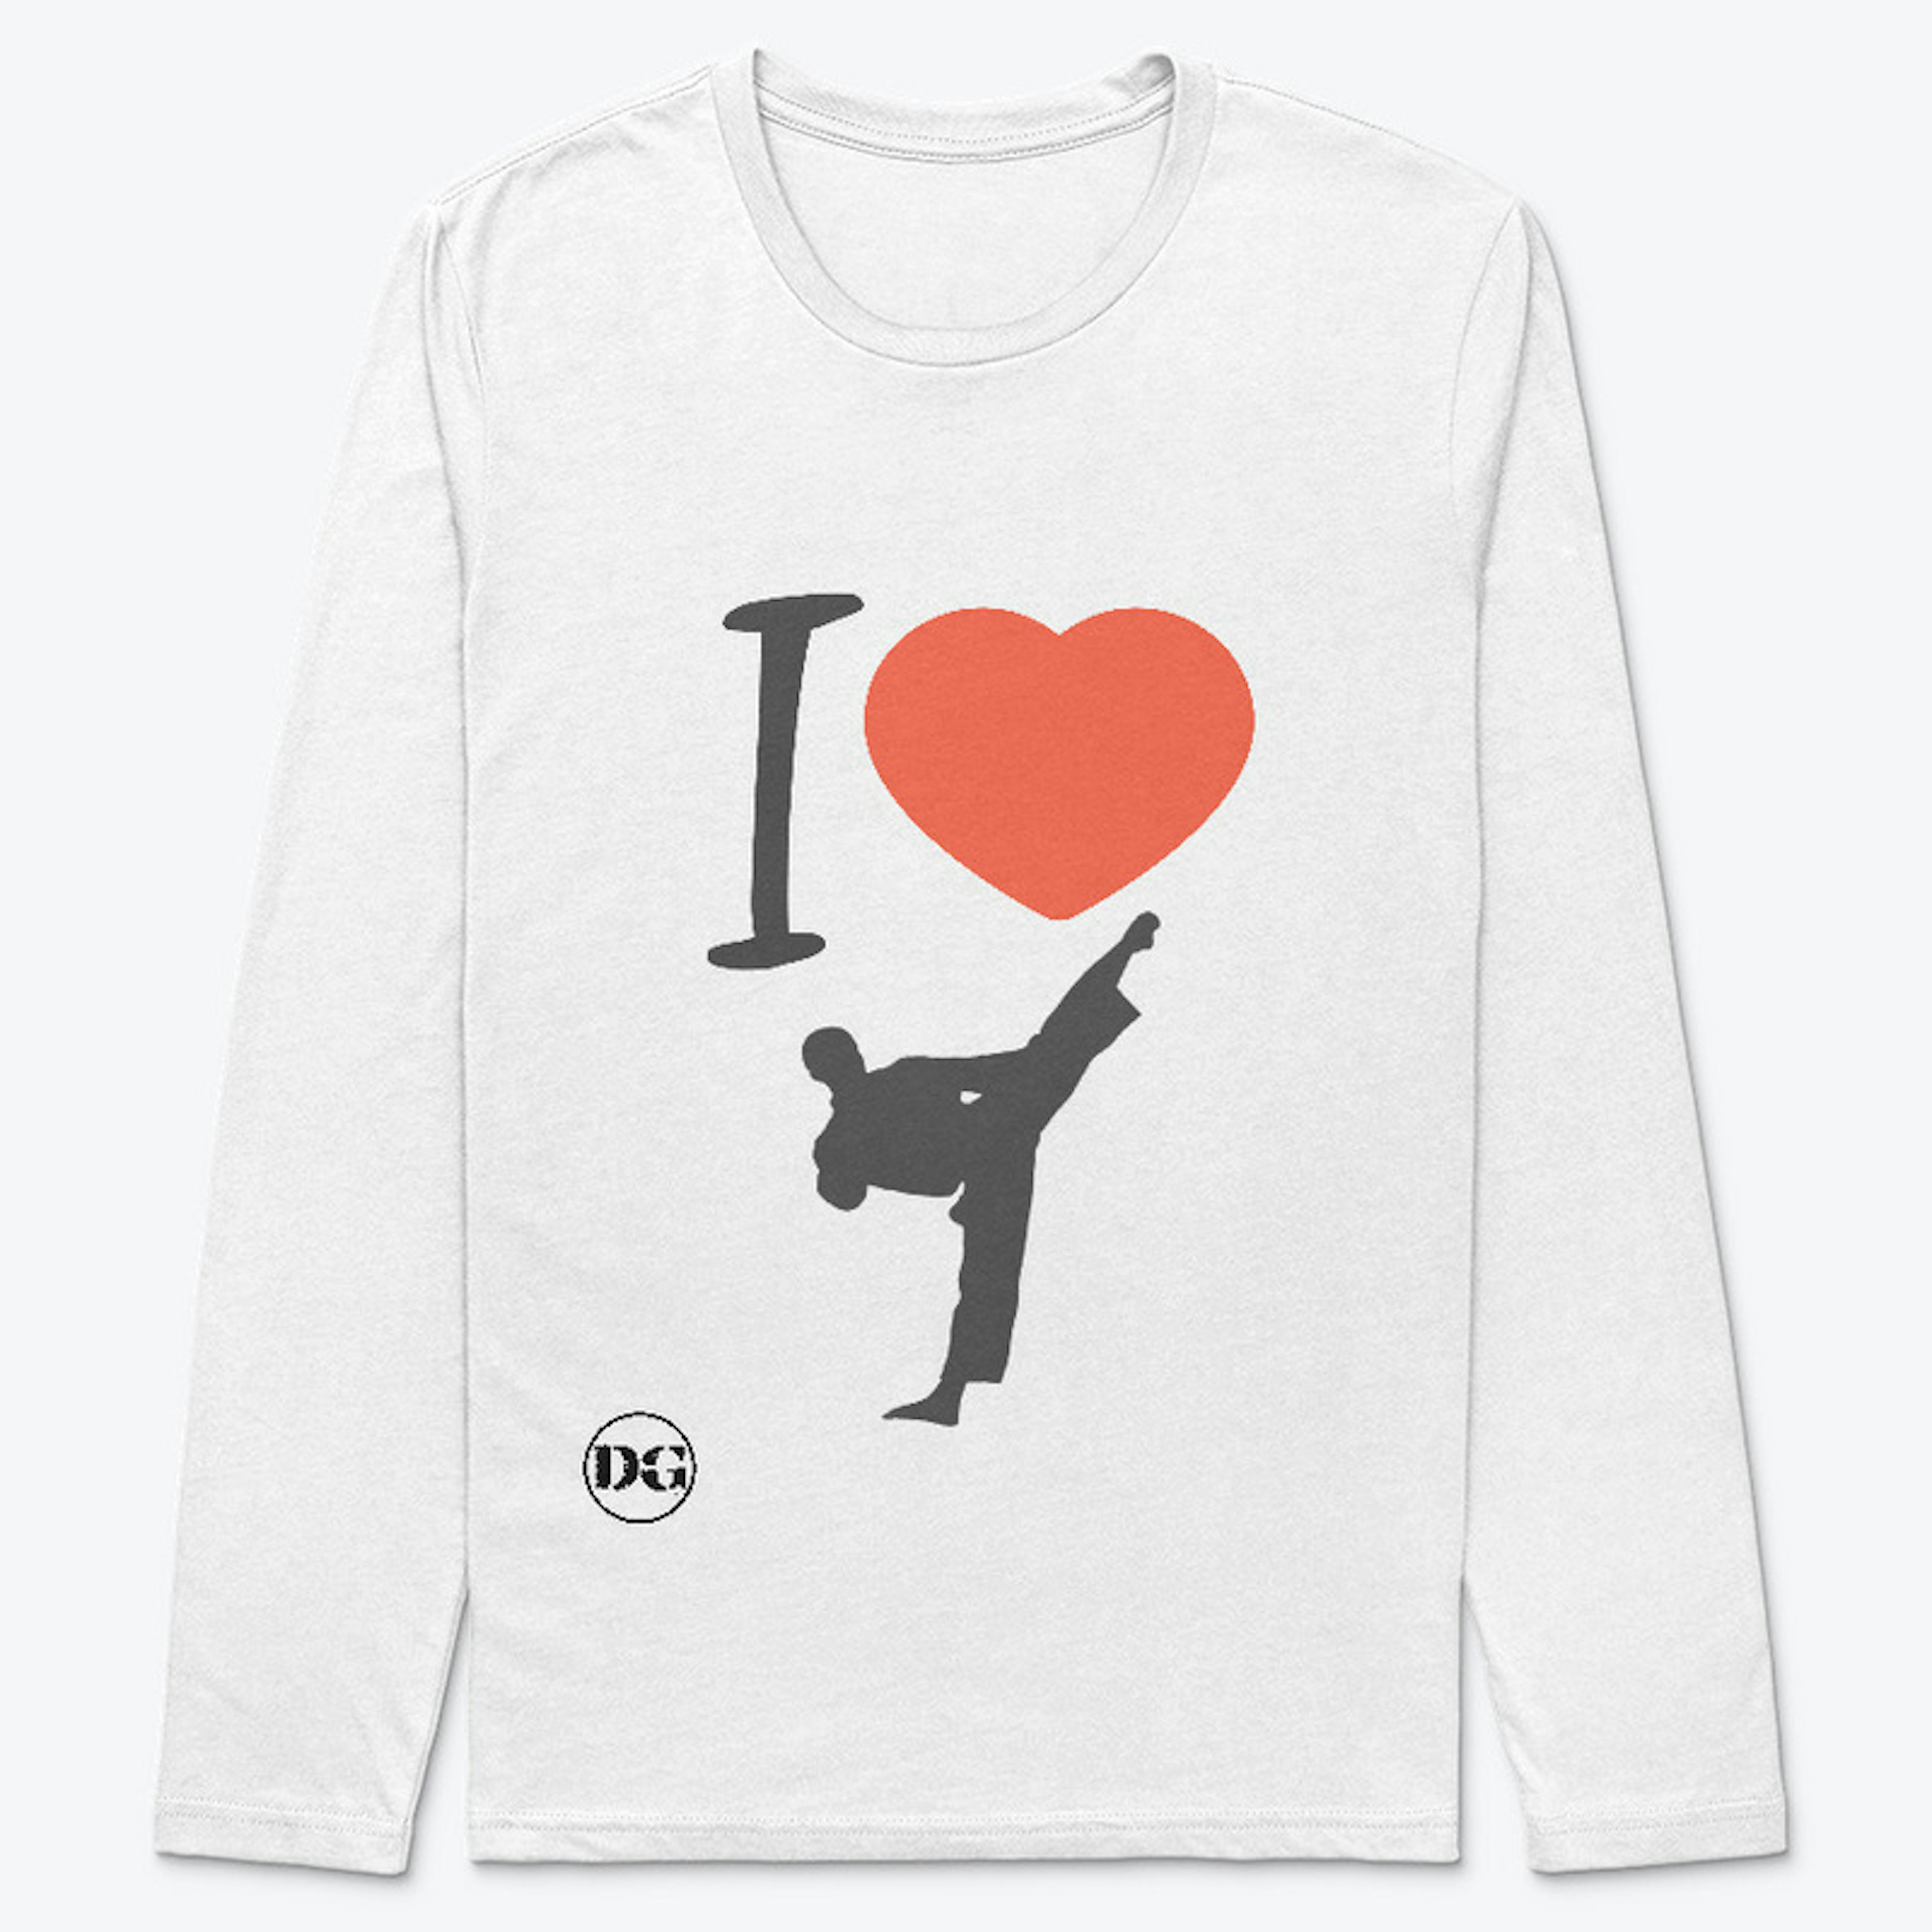 I Love TKD T-Shirts and More!